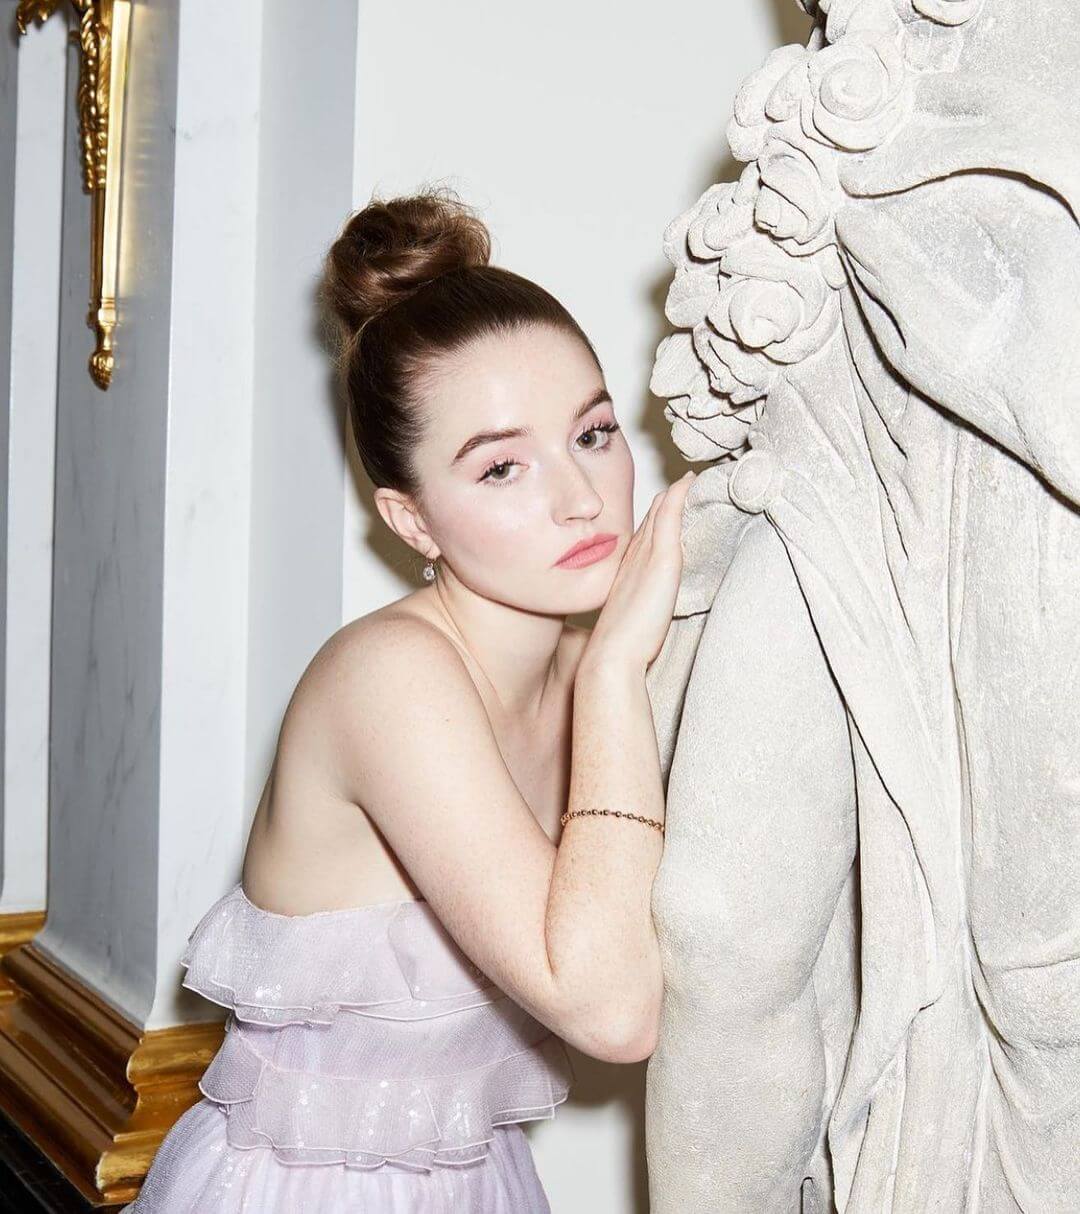 Kaitlyn Dever biography: Outside In, All Summers End, Movies and TV